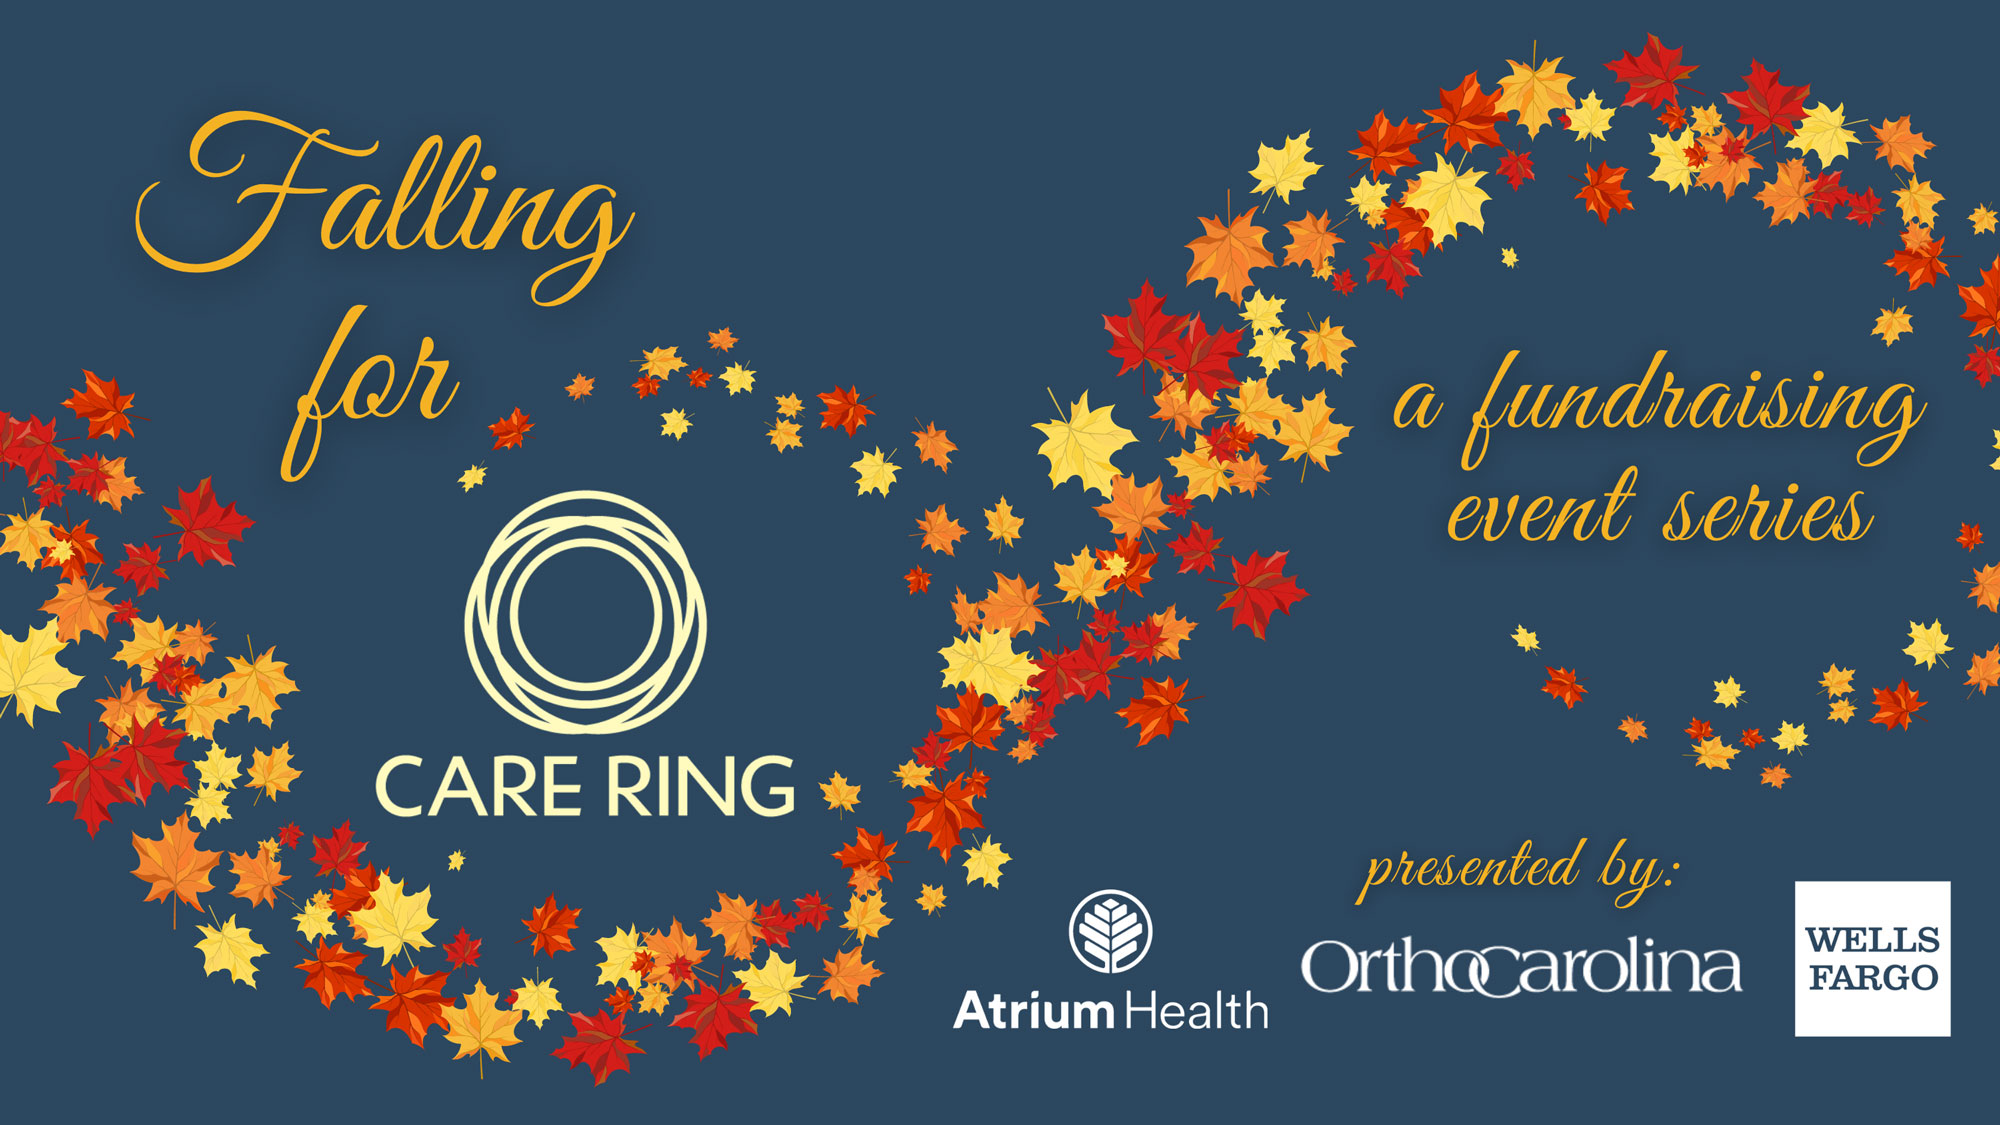 _Falling-for-Care-Ring-header-16x9-2000px